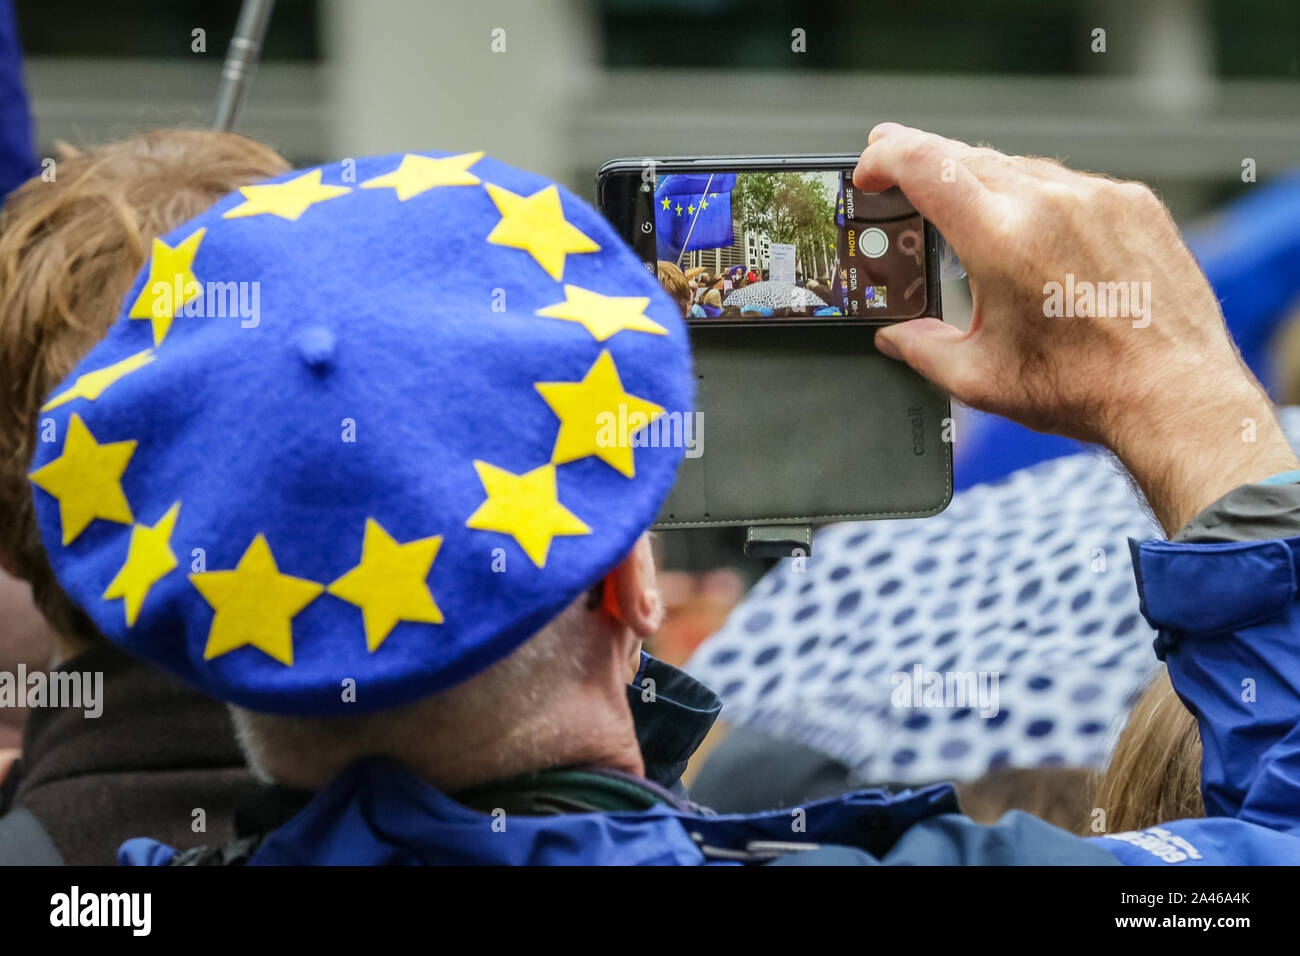 London, UK, 12 Oct 2019. A protester with blue and yellor beret takes pictures of the rally. Protesters rally in Westminster to defend the rights of the 5 million+ European Citizens living in the UK and British Citizens in the EU who are directly affected by Brexit. Key speaker and rally sites include outside Europe House, the European Parliament UK offices, The Home Office and 55 Tufton Street, base of several Eurosceptic and Brexit-related think tanks. Stock Photo